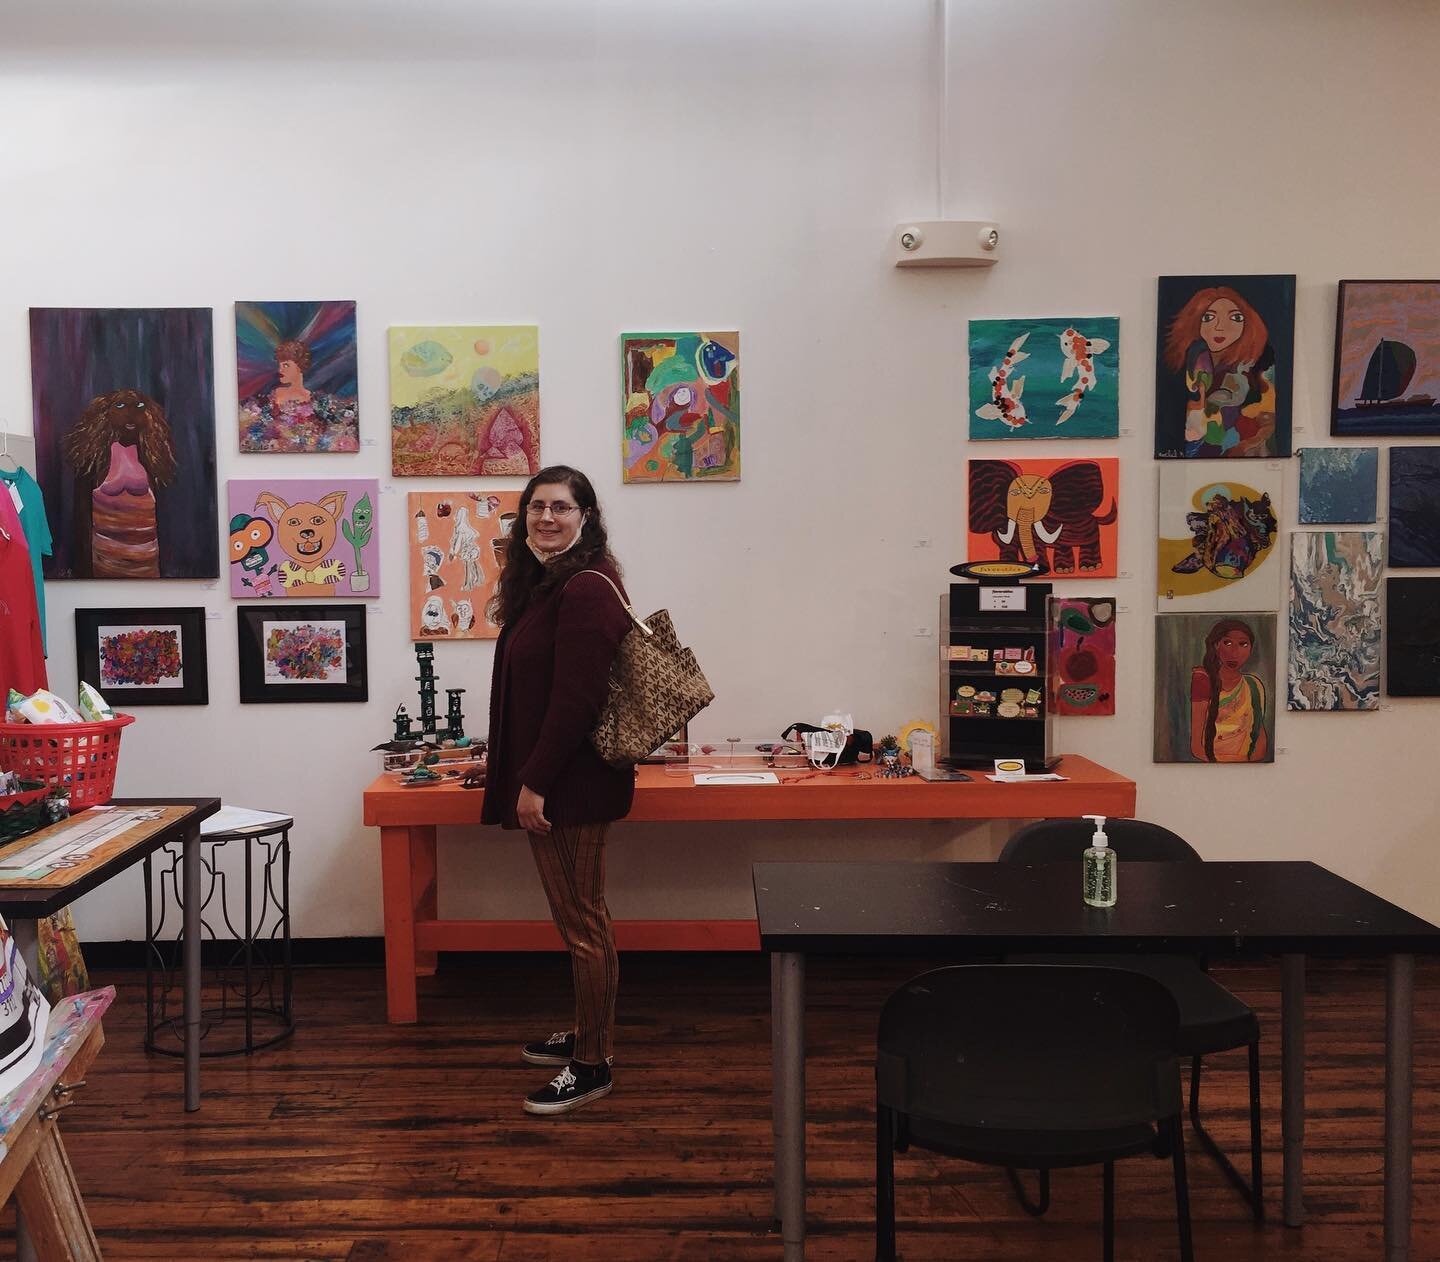 I stopped in today to visit @outsider_collective at @hopeartistevillage and there&rsquo;s so many awesome pieces by many incredible individuals. Stop by this week and support local artists and businesses!